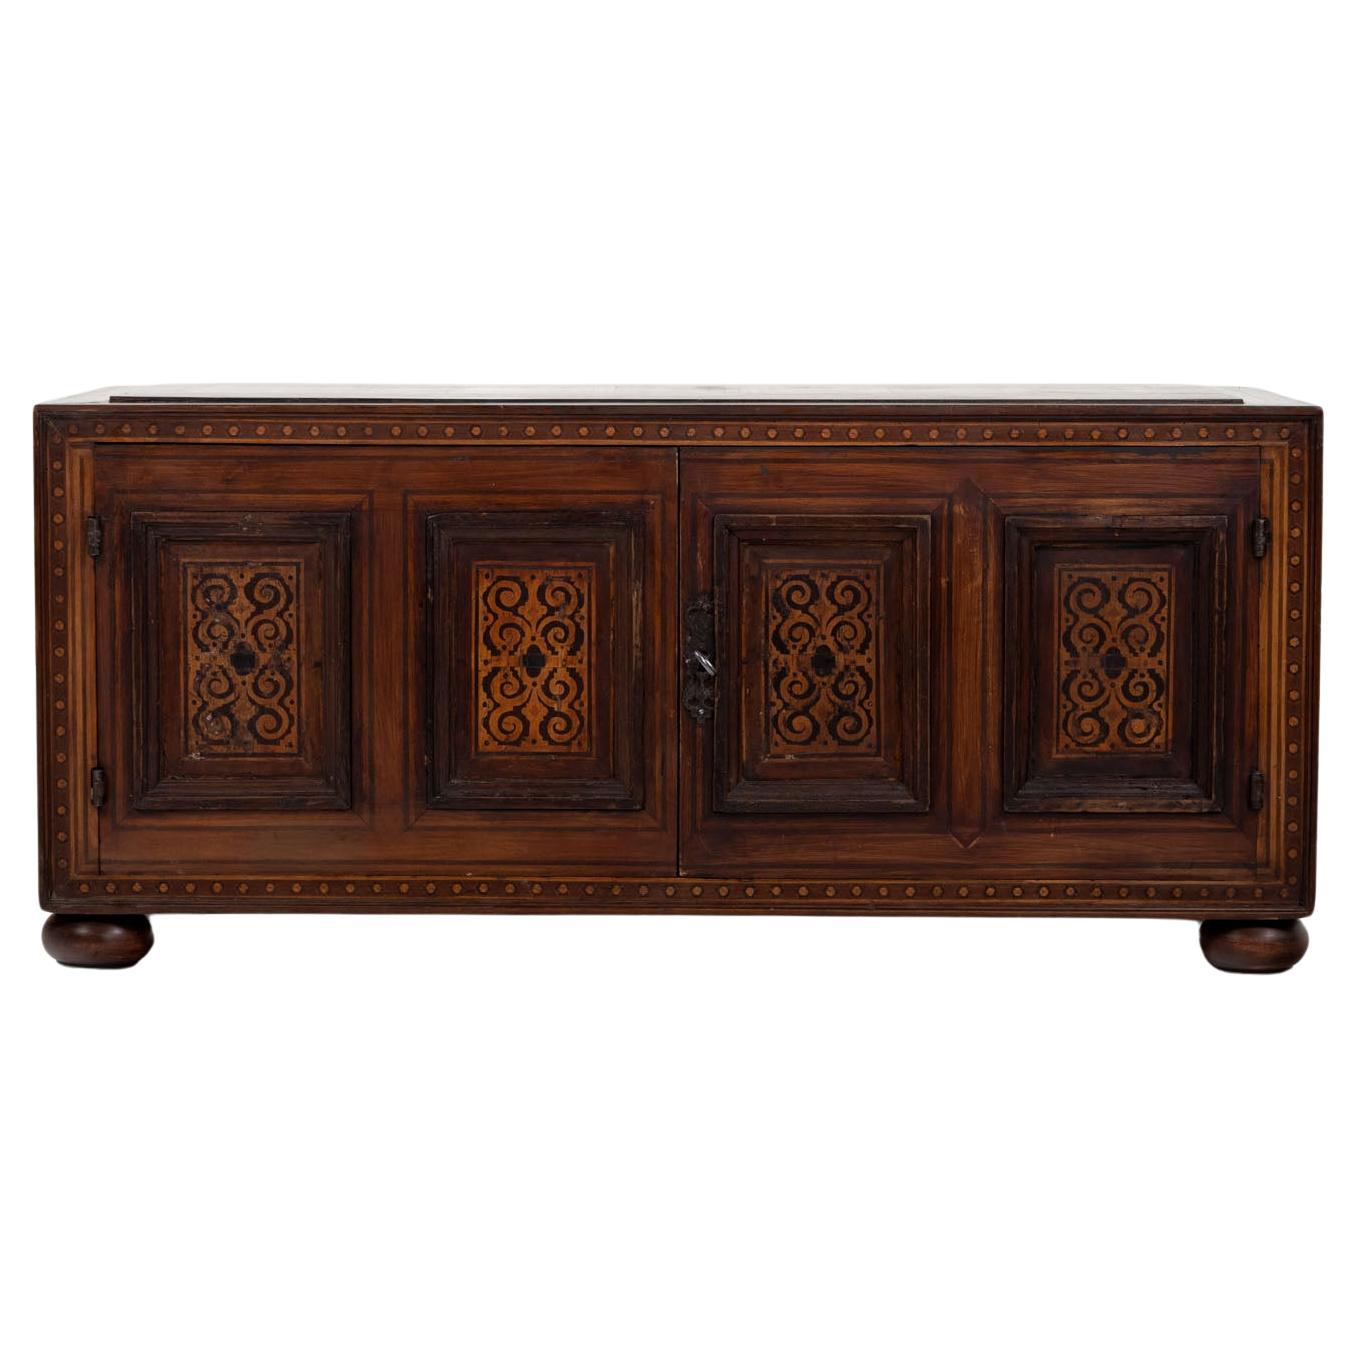 Chest with Doors, late 19th century